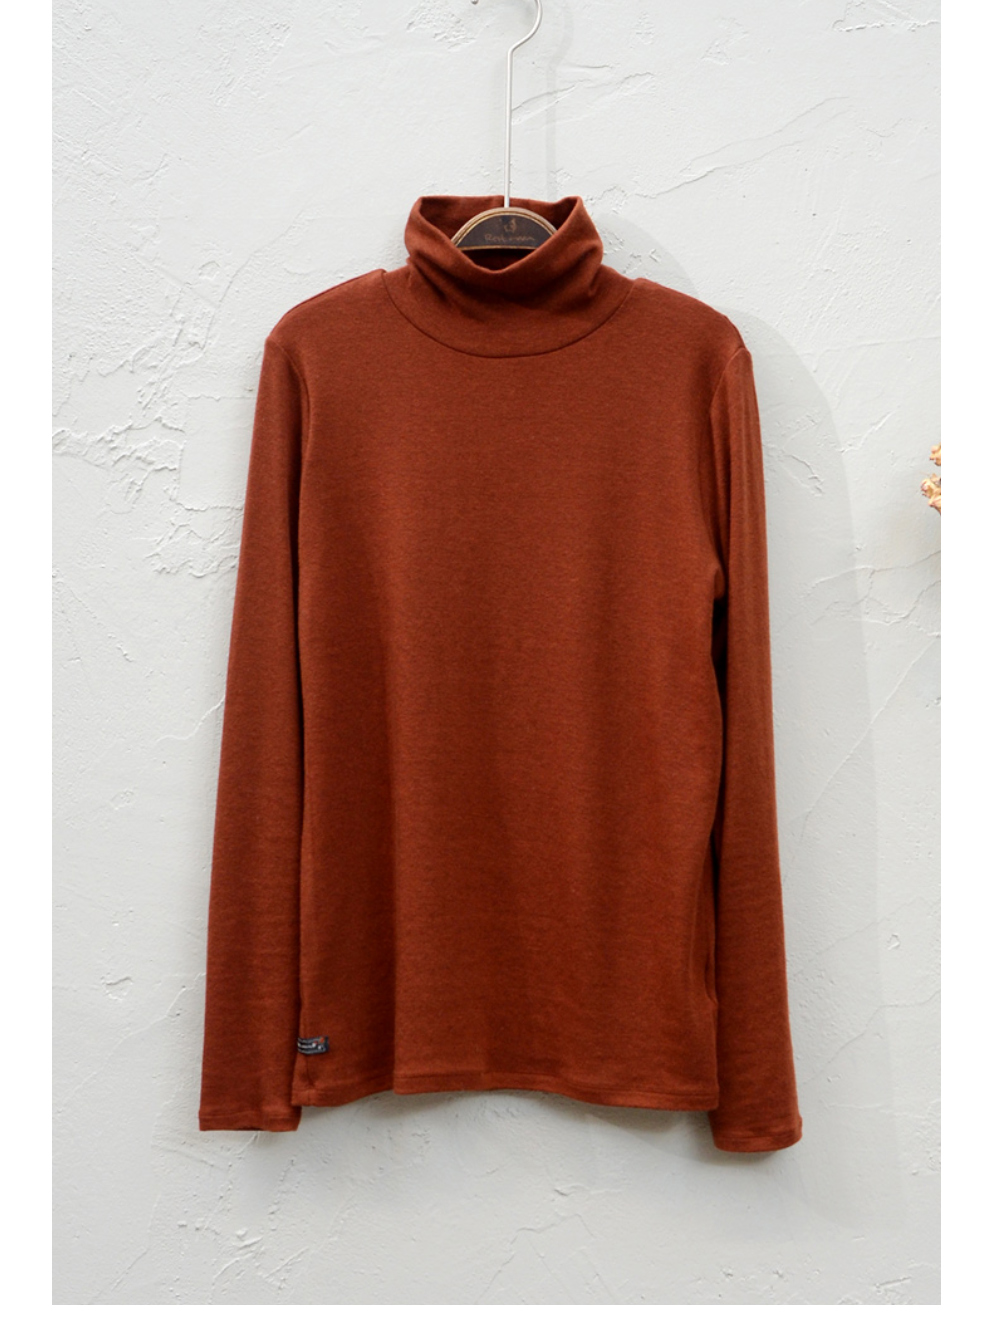 long sleeved tee brown color image-S3L3